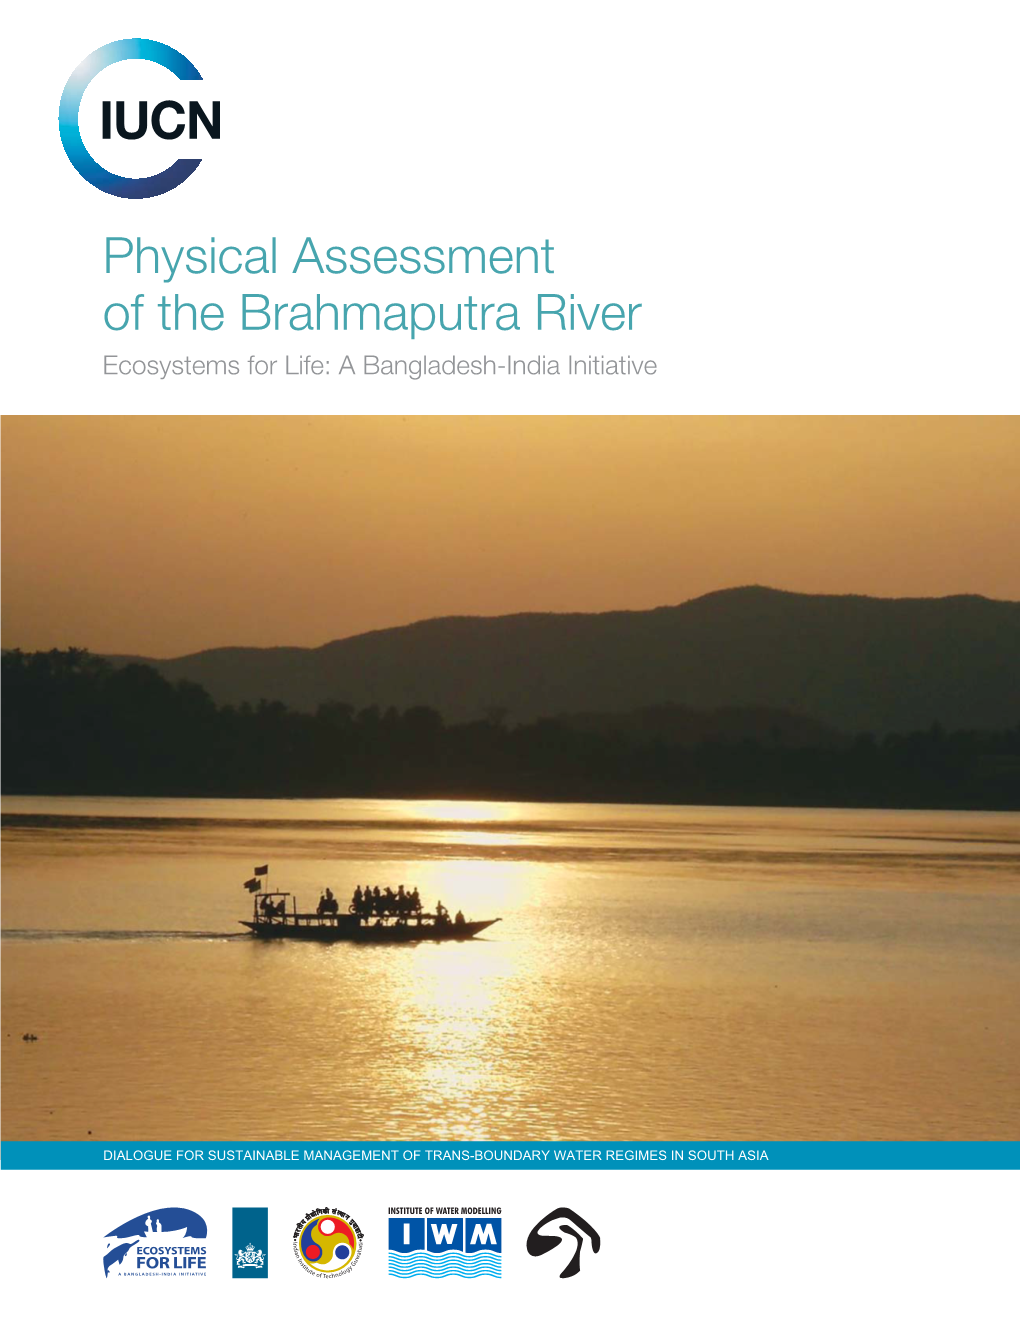 Physical Assessment of the Brahmaputra River Ecosystems for Life: a Bangladesh-India Initiative